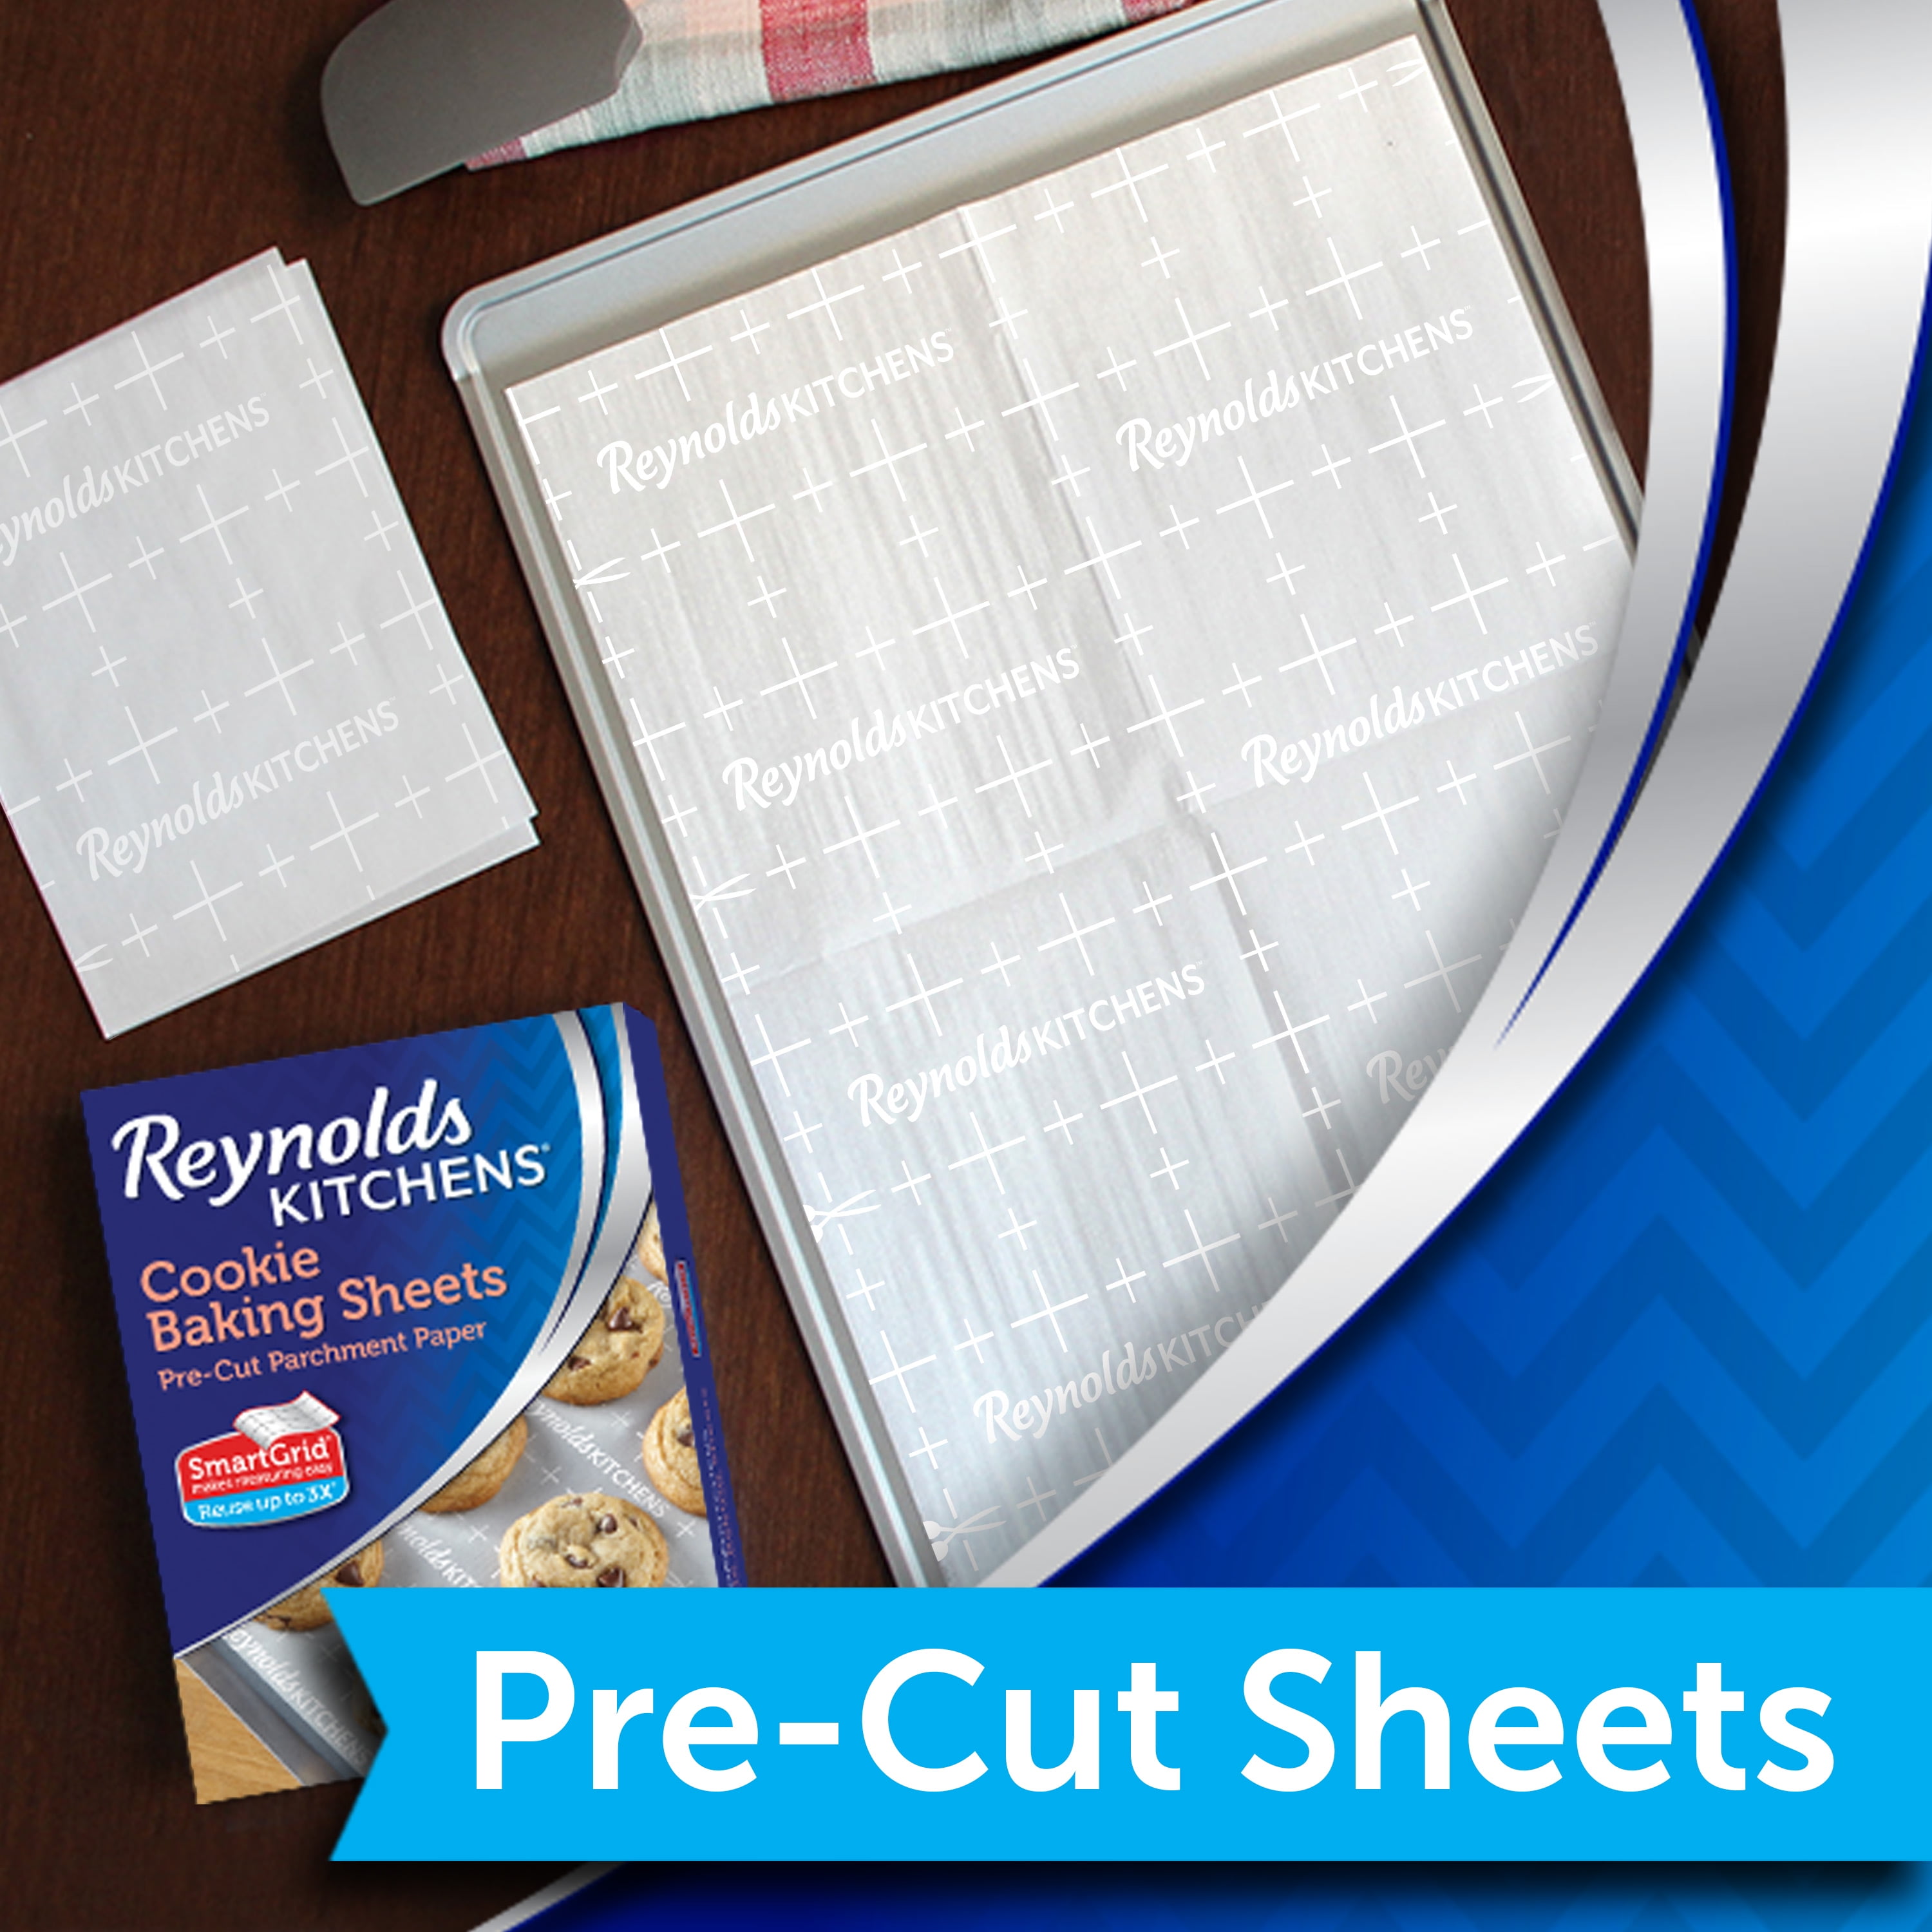 12x16 Reynolds Kitchens Cookie Baking Sheets Parchment Paper 22 Sheets 